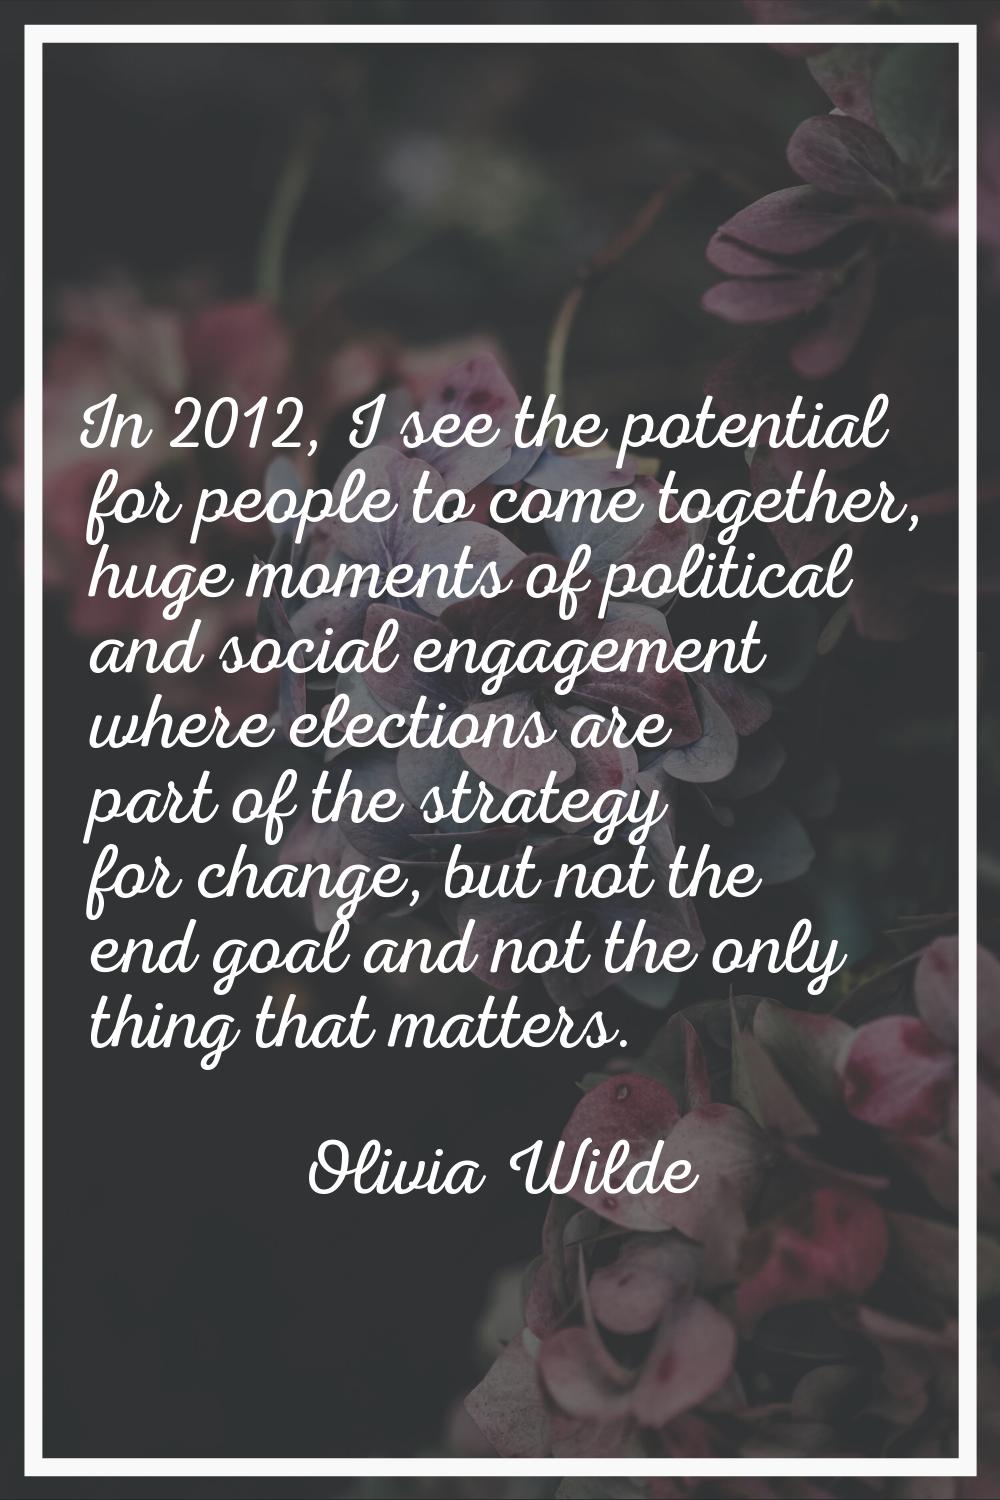 In 2012, I see the potential for people to come together, huge moments of political and social enga